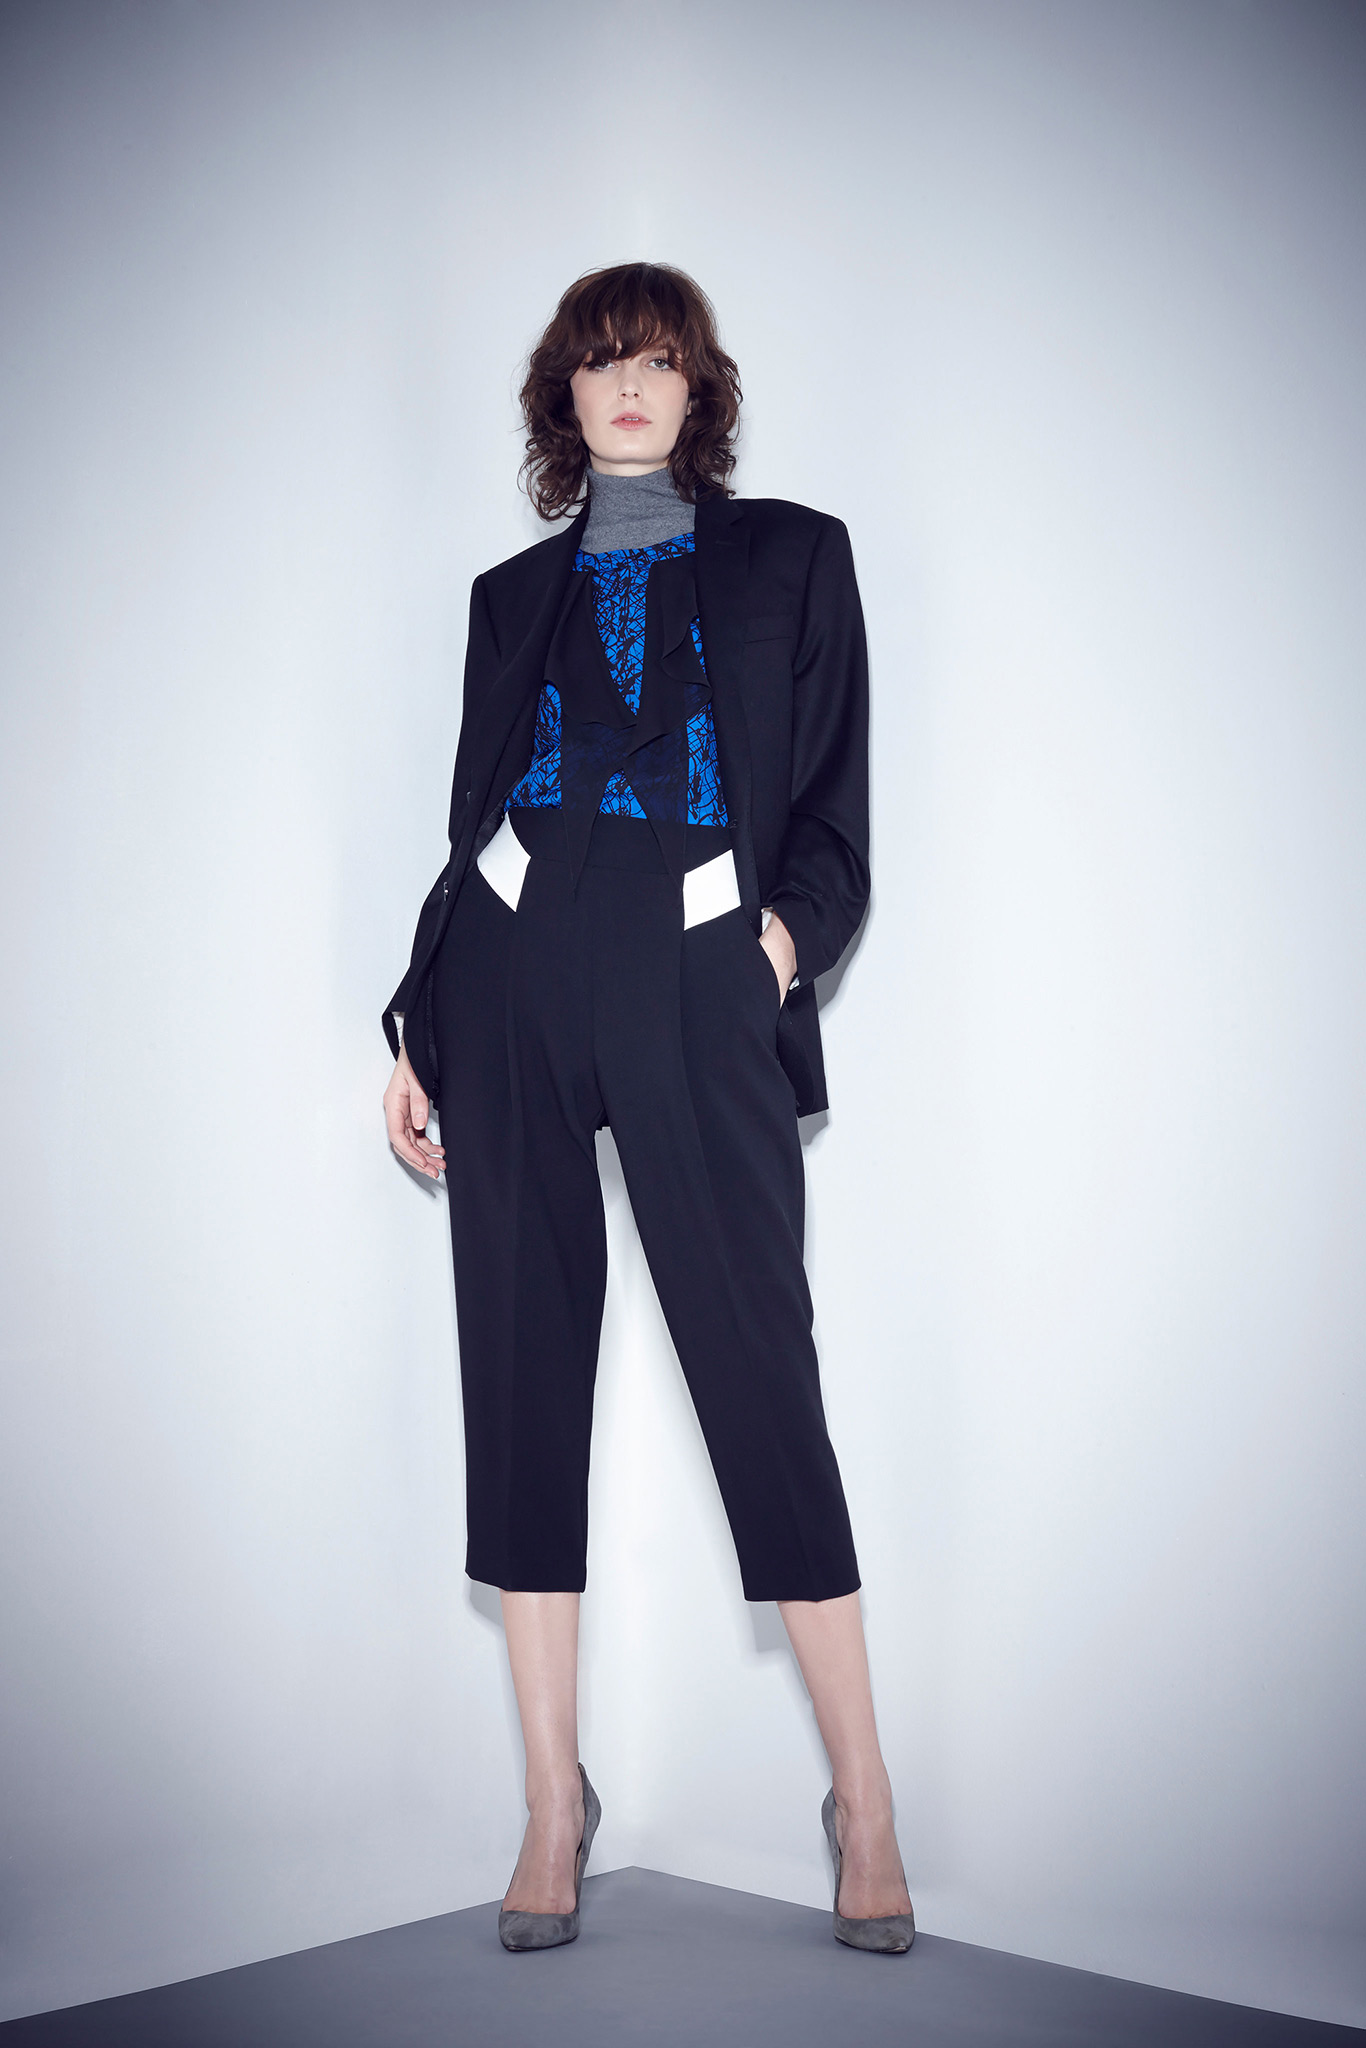 MILLY - PRE AUTUMN/WINTER 2015-16 READY-TO-WEAR